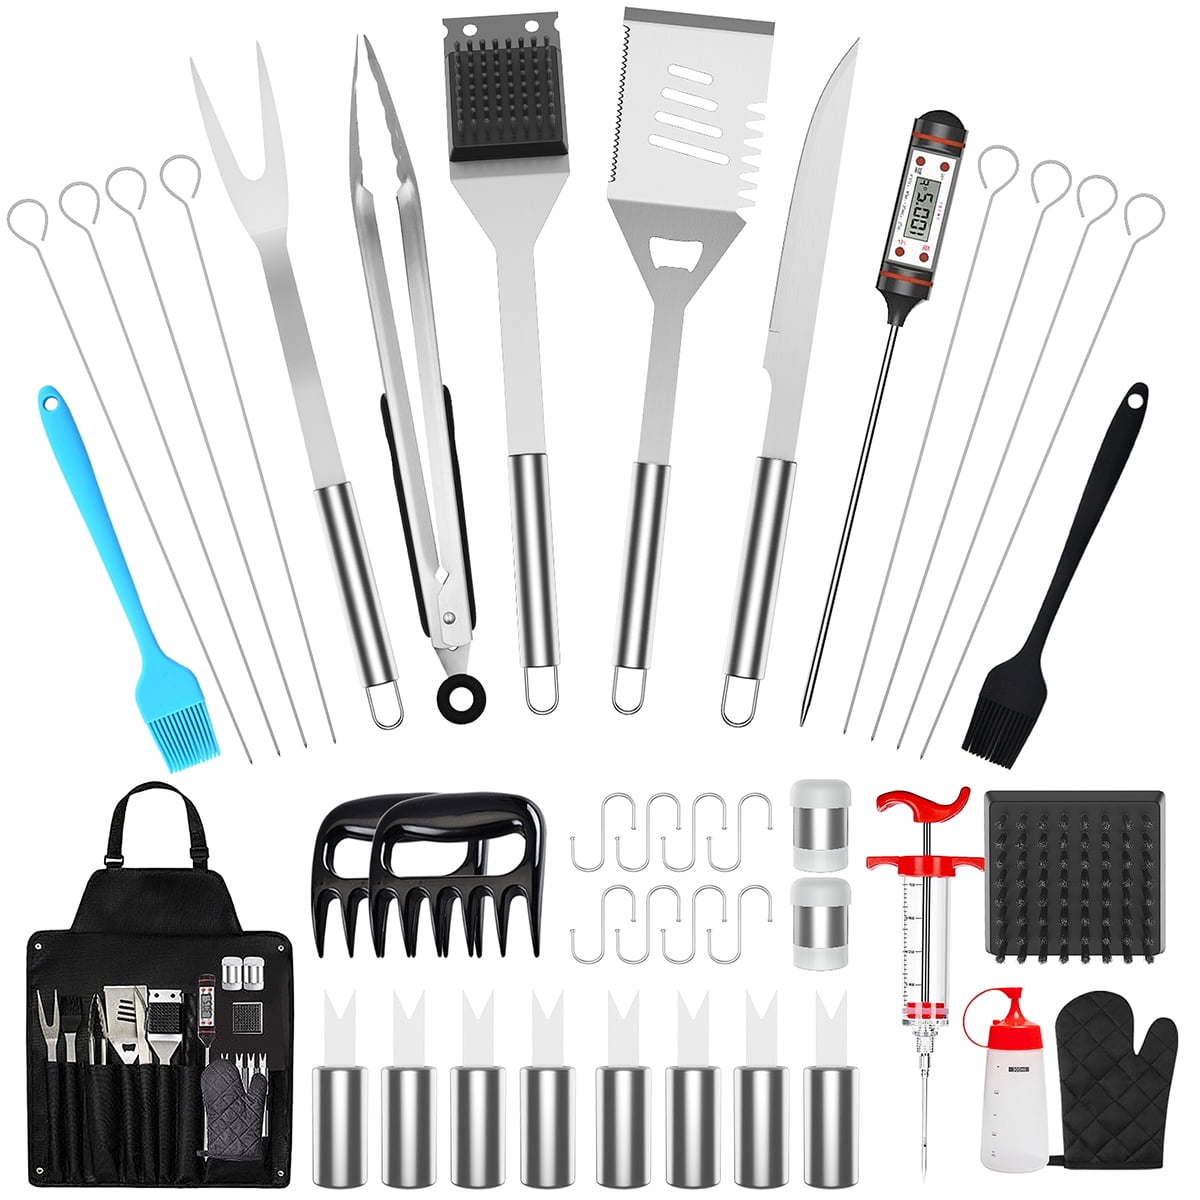  HaSteeL Grill Utensil Set of 27, Heavy Duty Stainless Steel Barbecue  Accessories with Carrying Bag, Complete BBQ Grilling Tools Kit Perfect for  Outdoor BBQ Backyard Cooking, Dishwasher Safe & Man